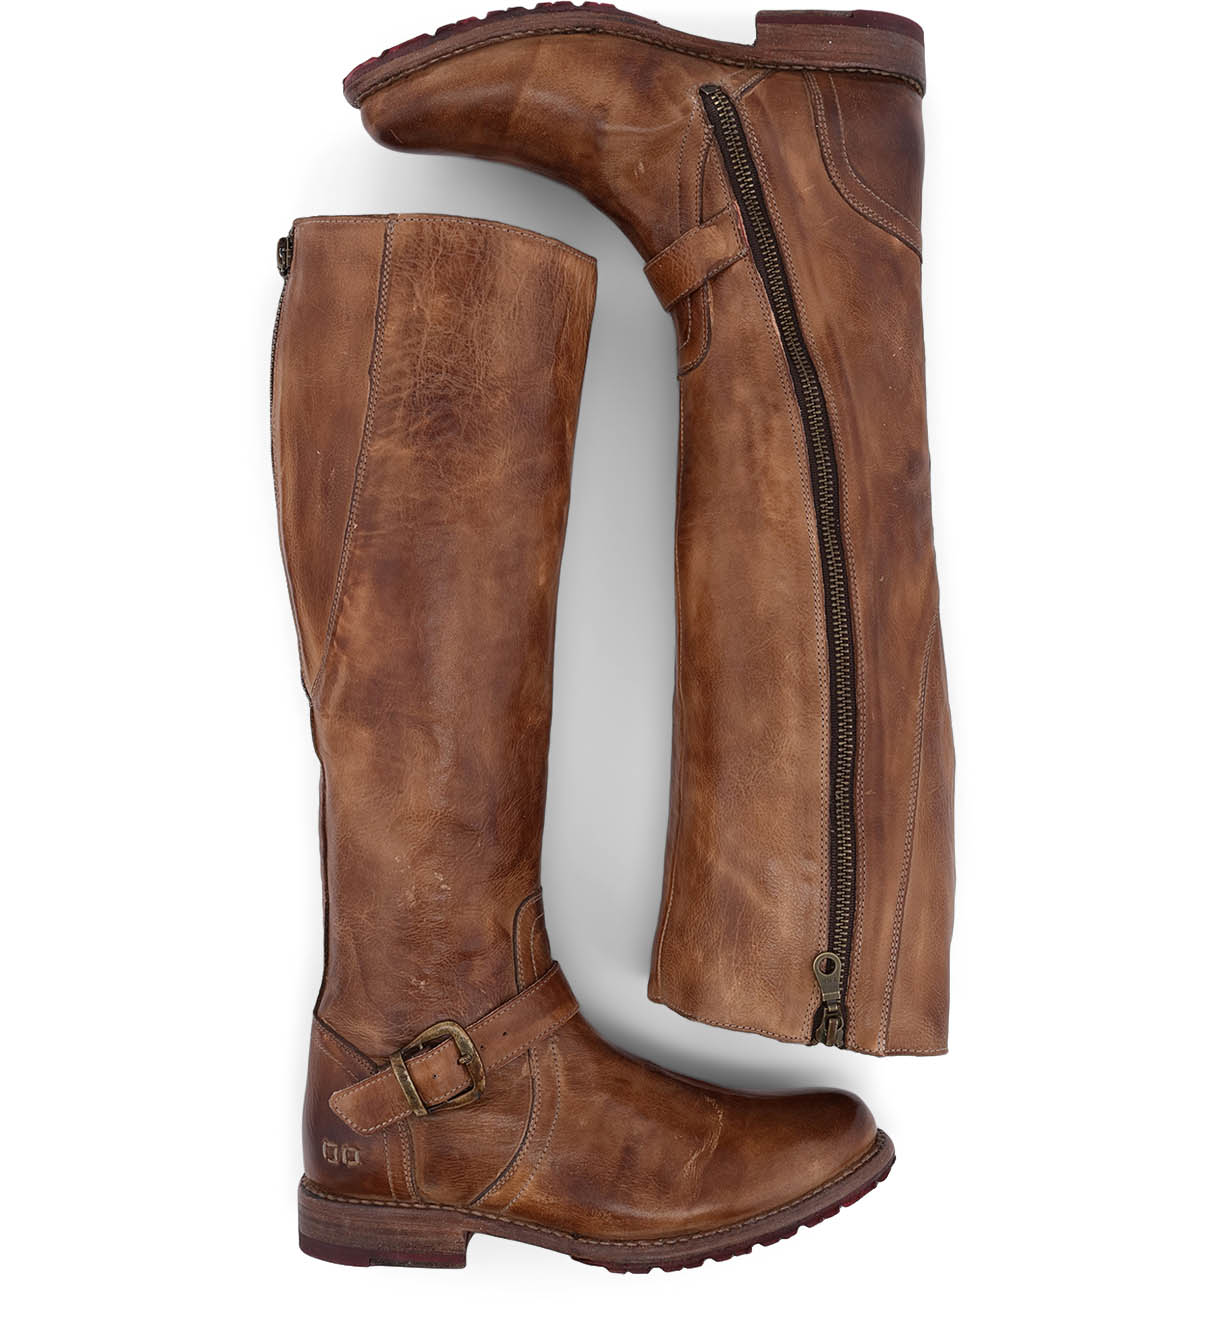 A pair of Glaye riding boots with zippers on the side from Bed Stu.